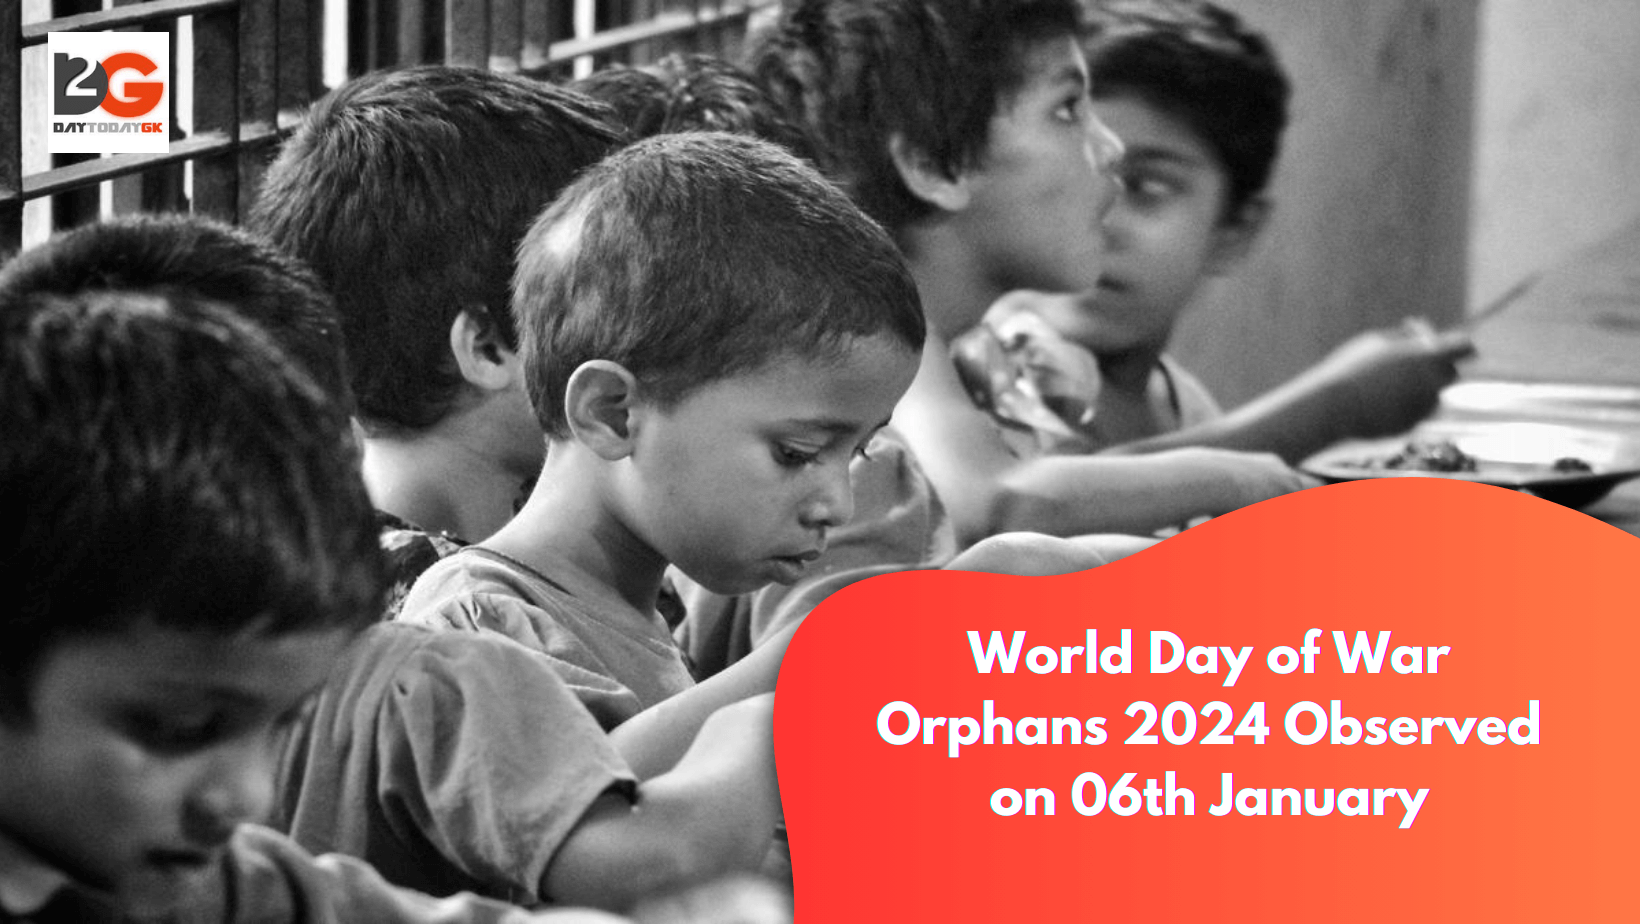 World Day of War Orphans 2024 Observed on 06th January